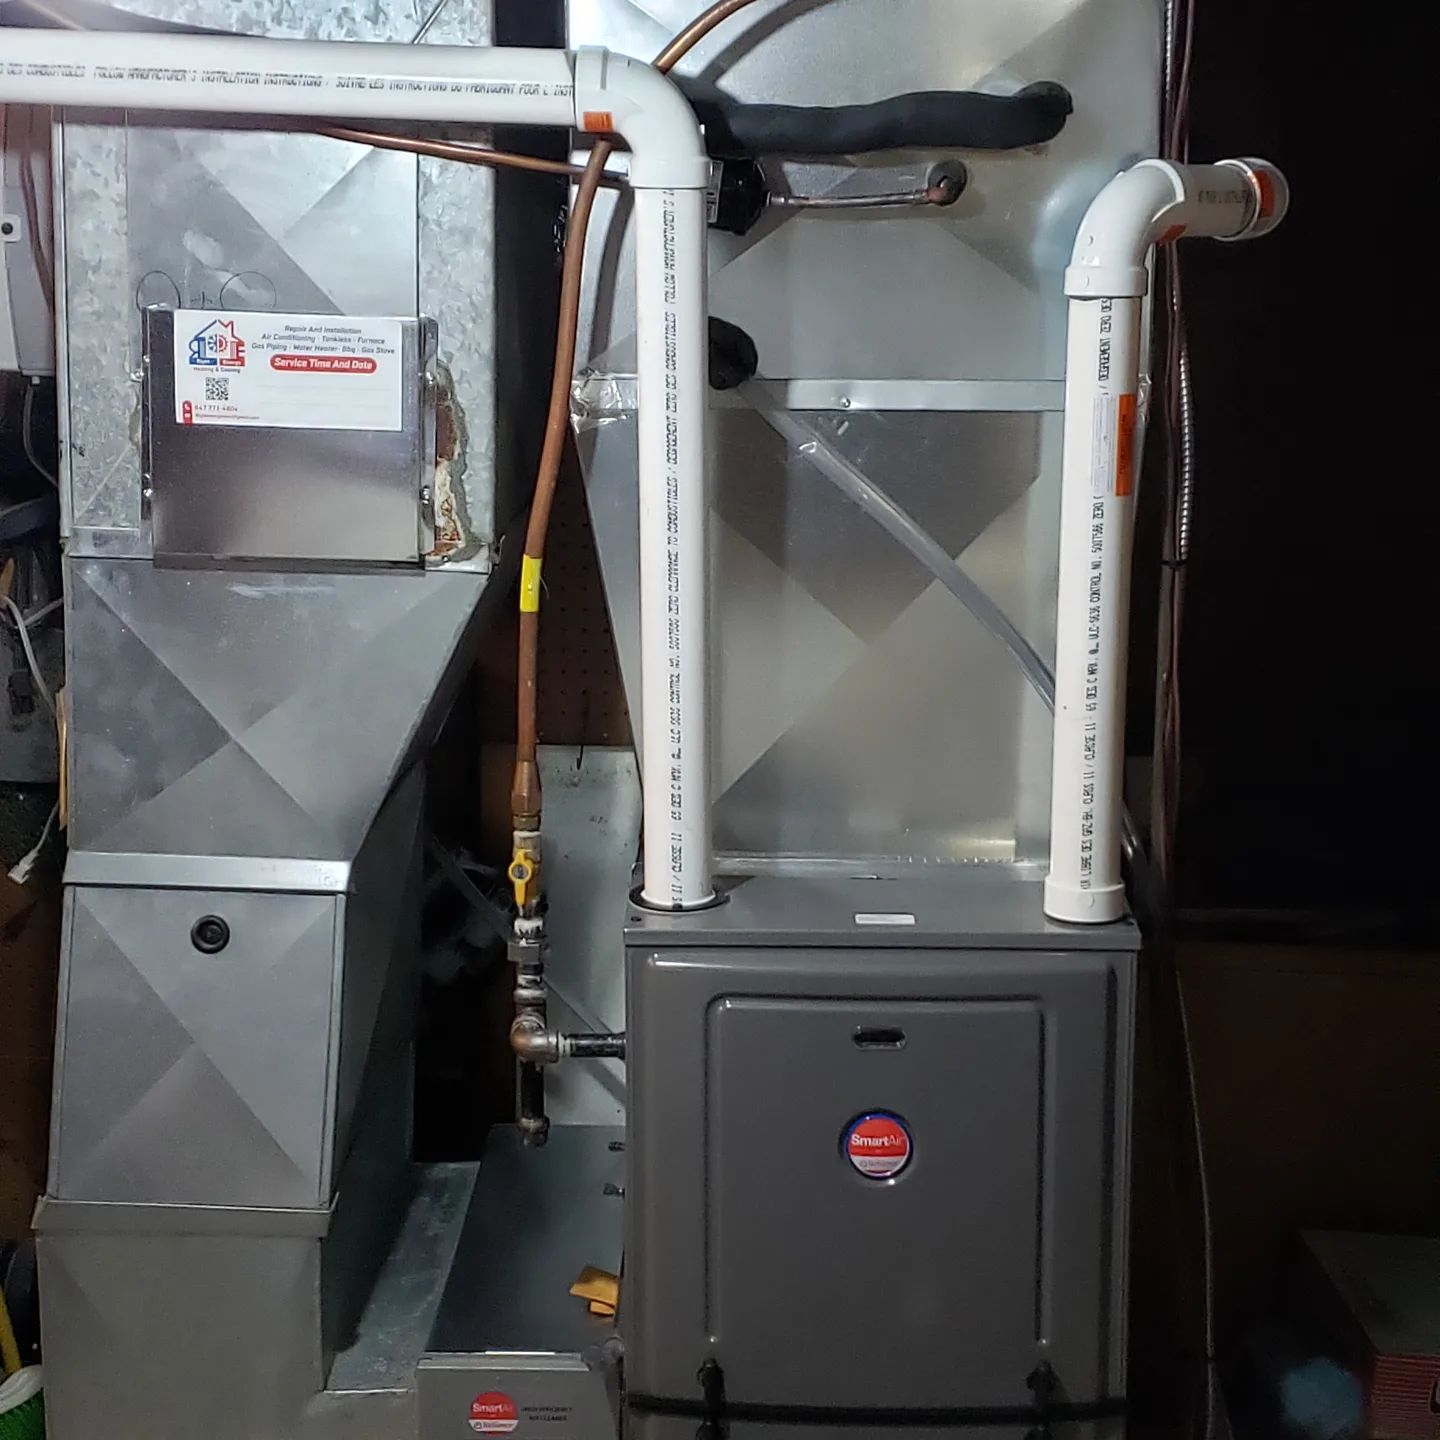 Heating unit service provided by Right Energy